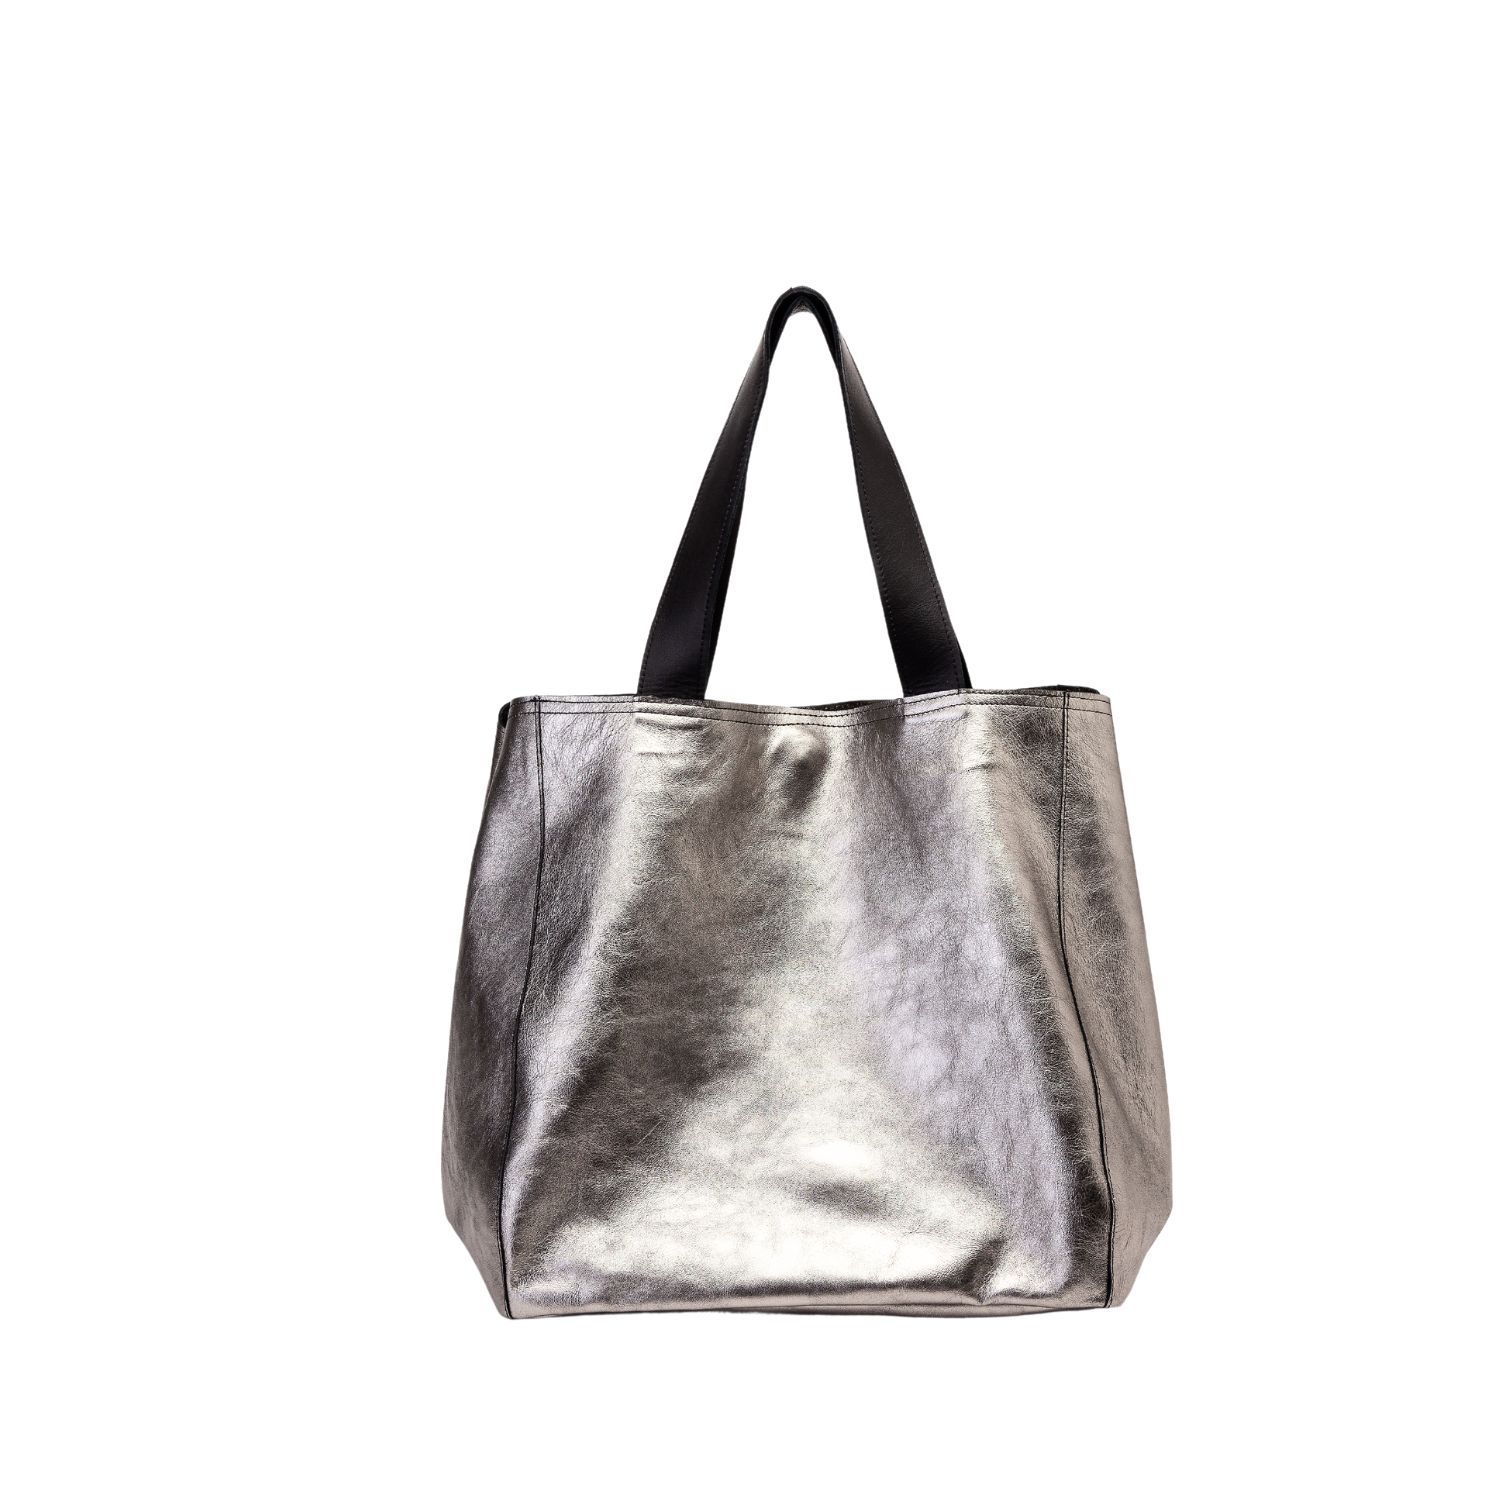 Women’s Slouchy Tote Bag - Silver Soft Leather- Large Size Juan-Jo